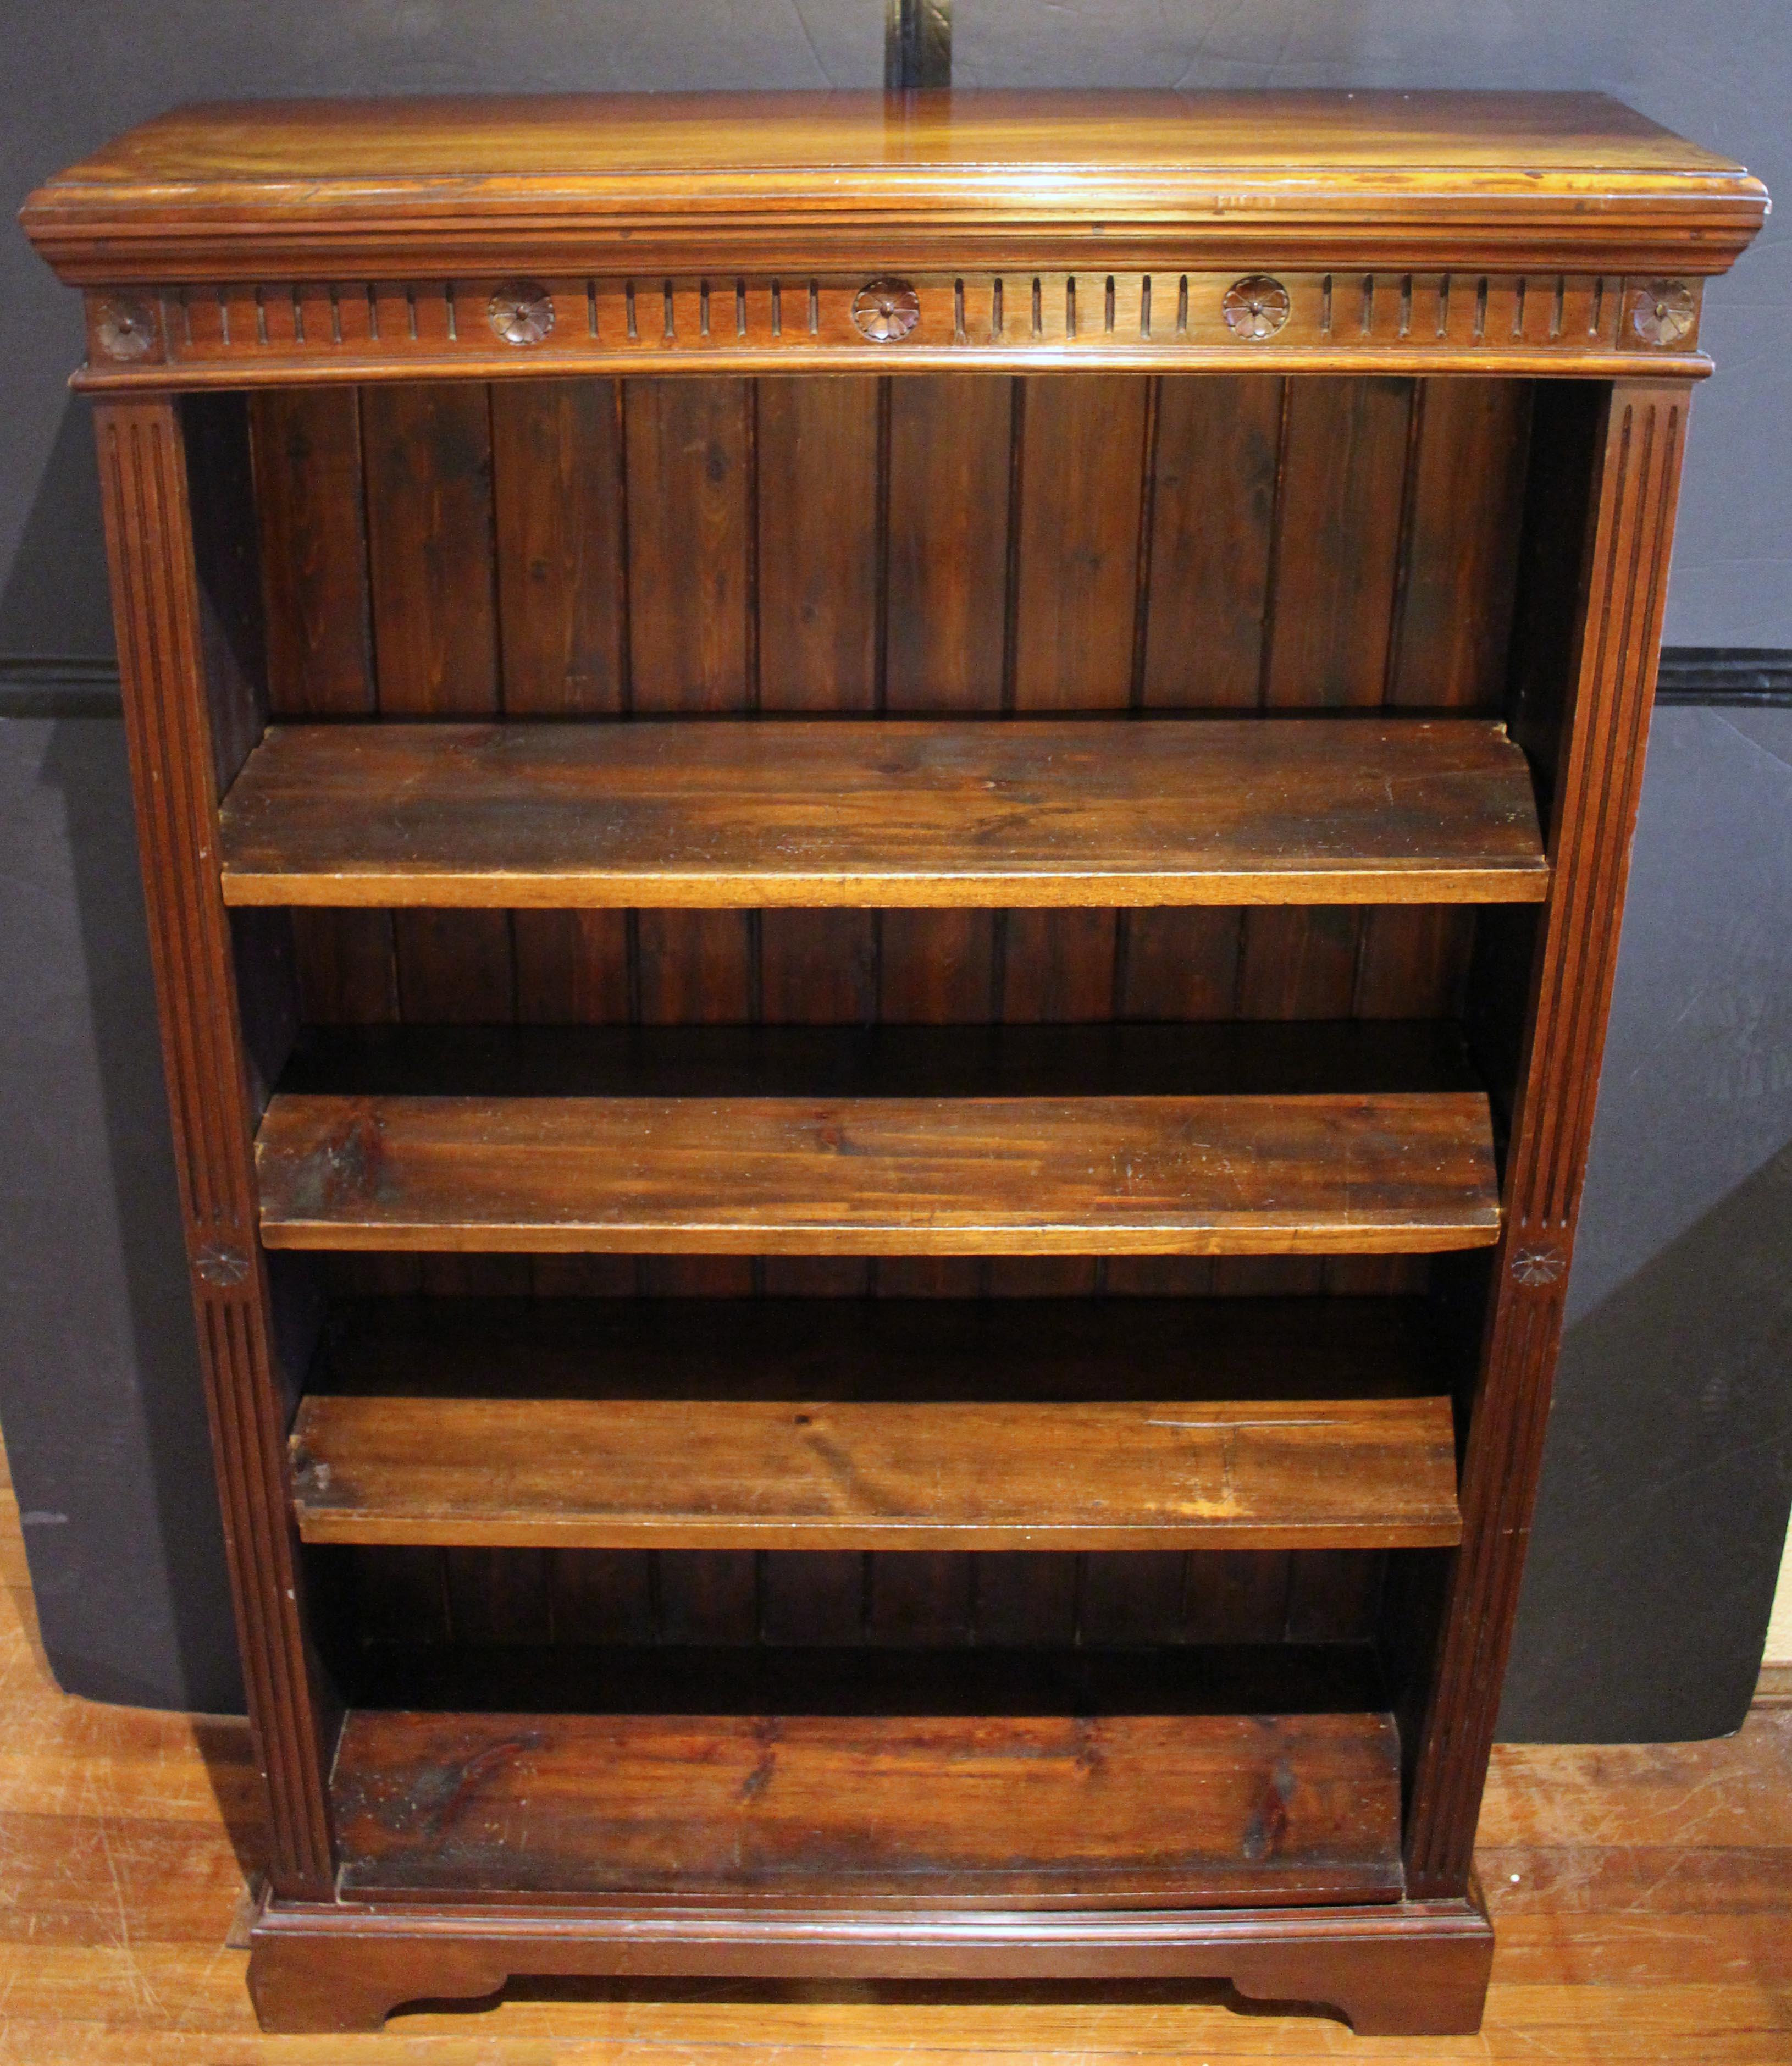 Late 19th-early 20th century open bookcase, English. Three peg supported adjustable shelves. Plinth base with cut out front & solid sides. Well molded crown over frieze of flutes & rosettes, repeated in the uprights. Roughness to the finish on the